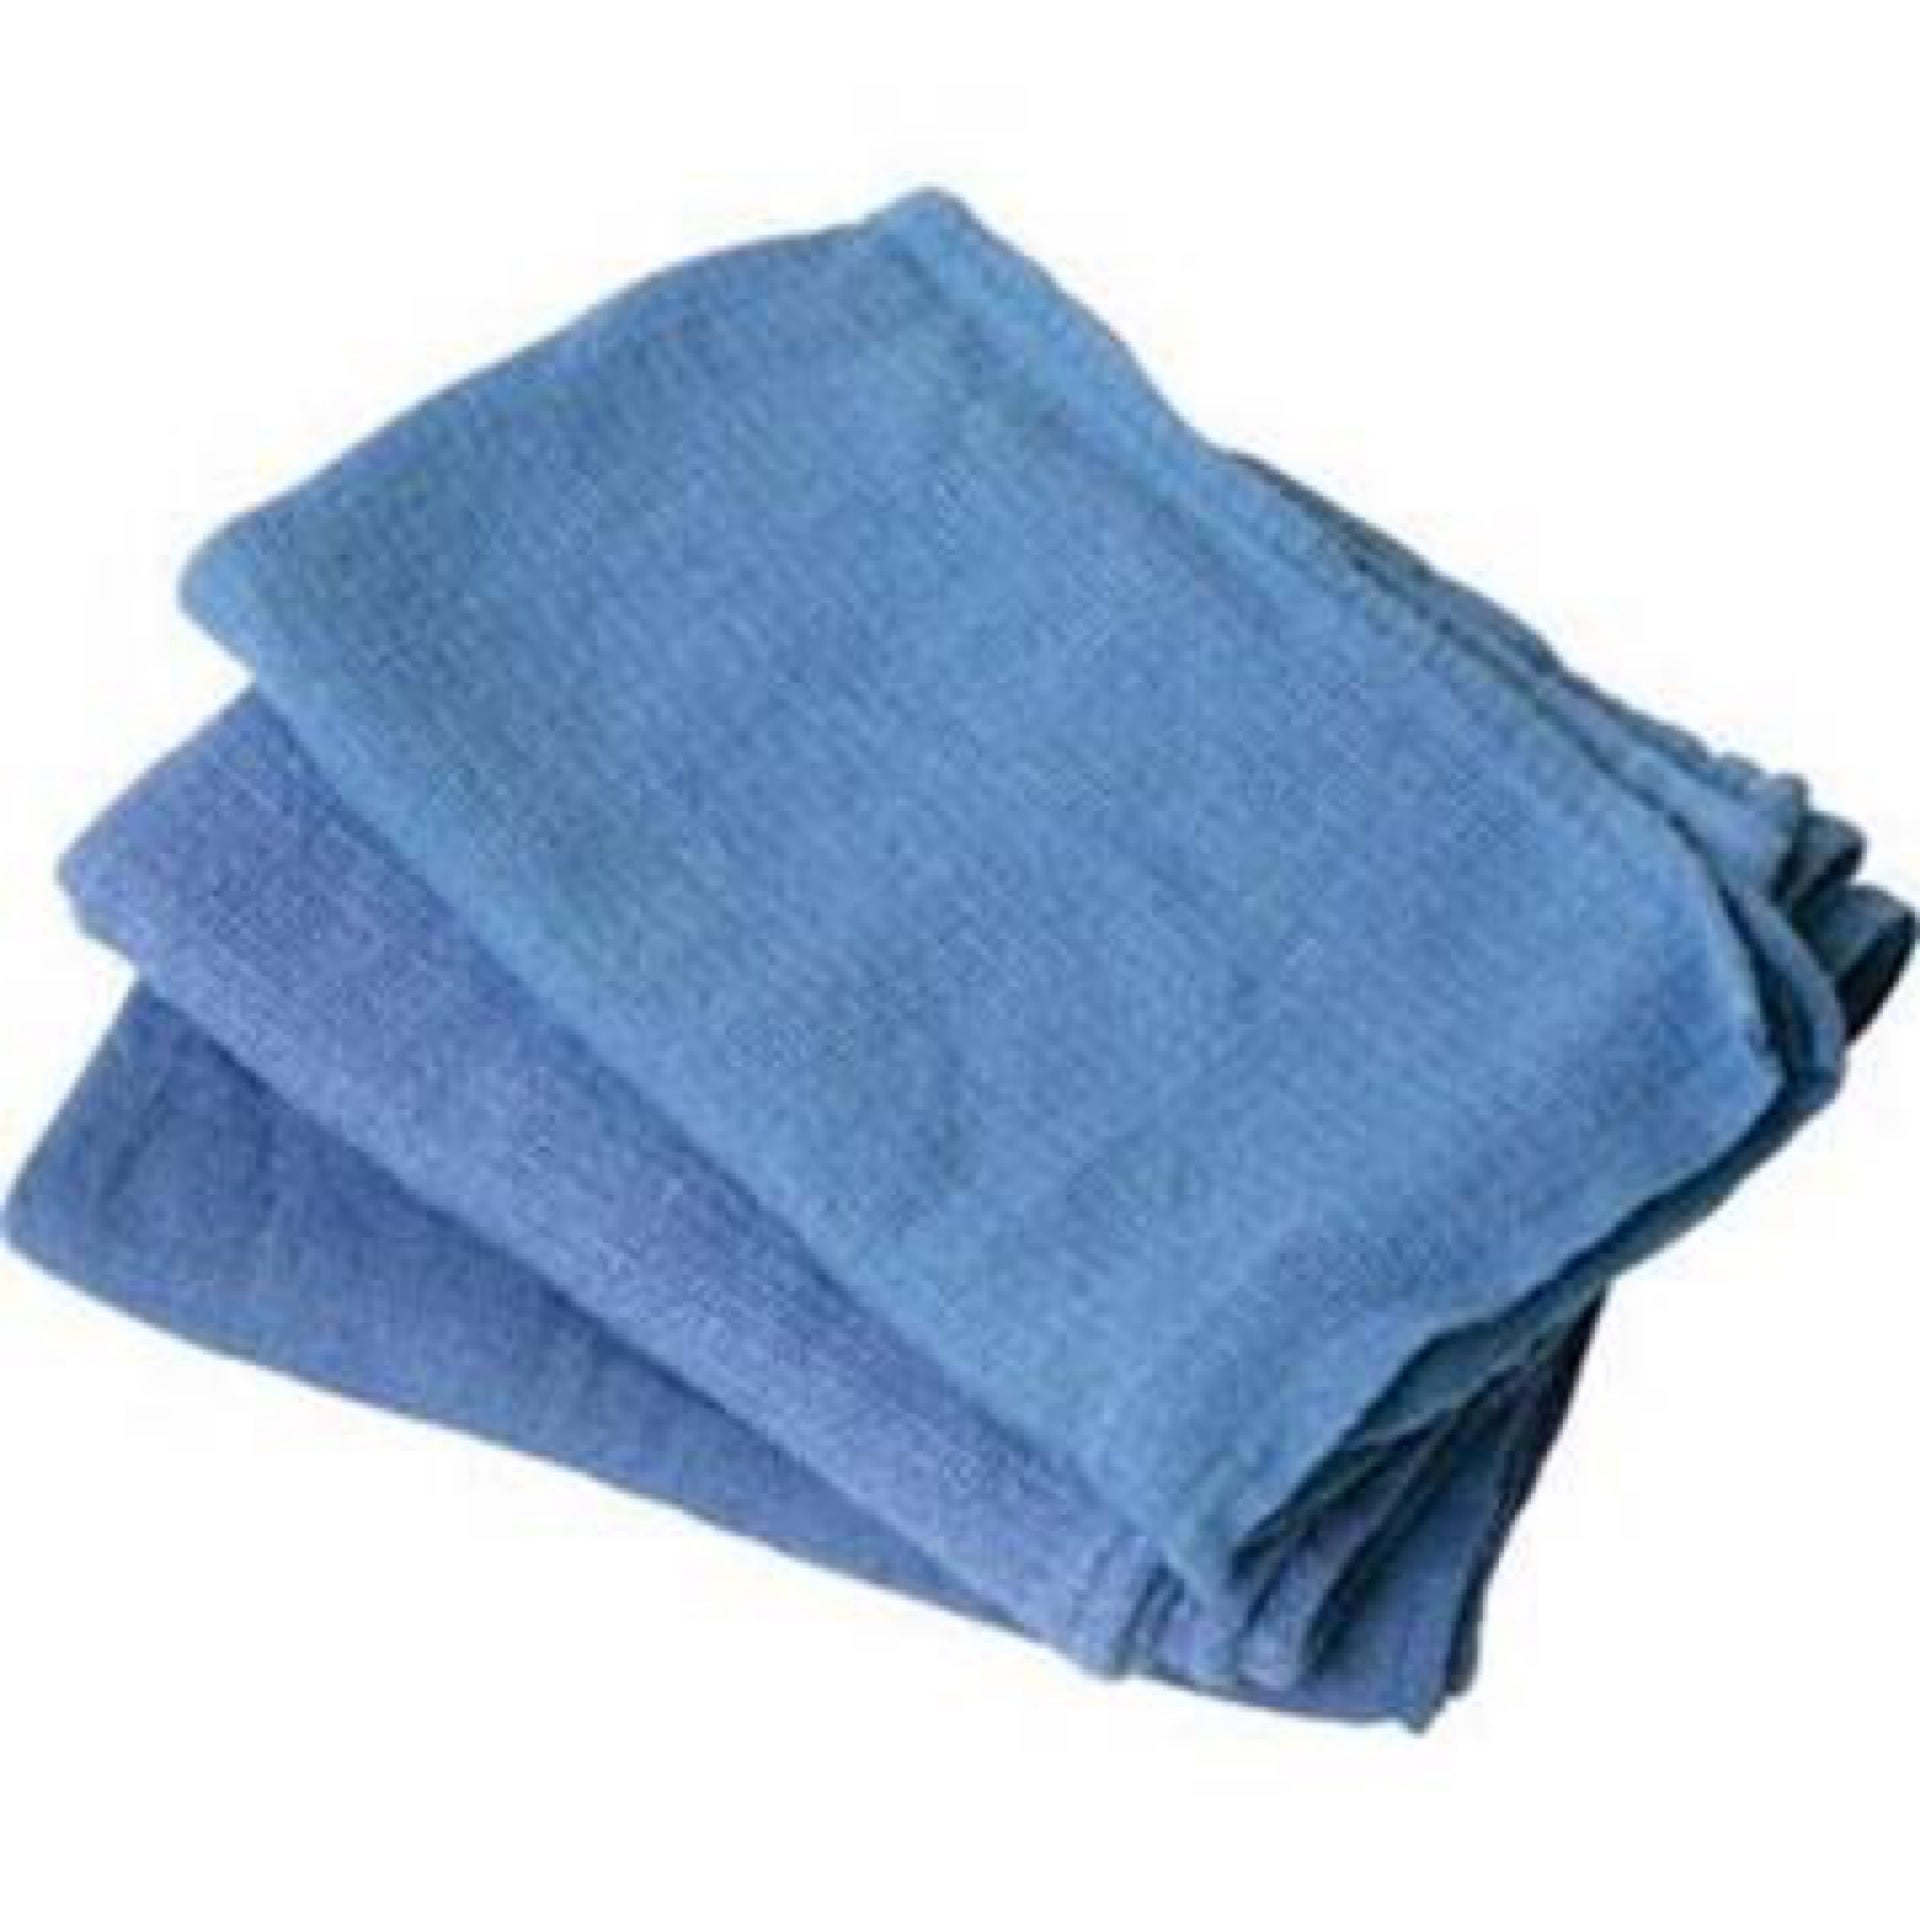 Surgical Huck Towels